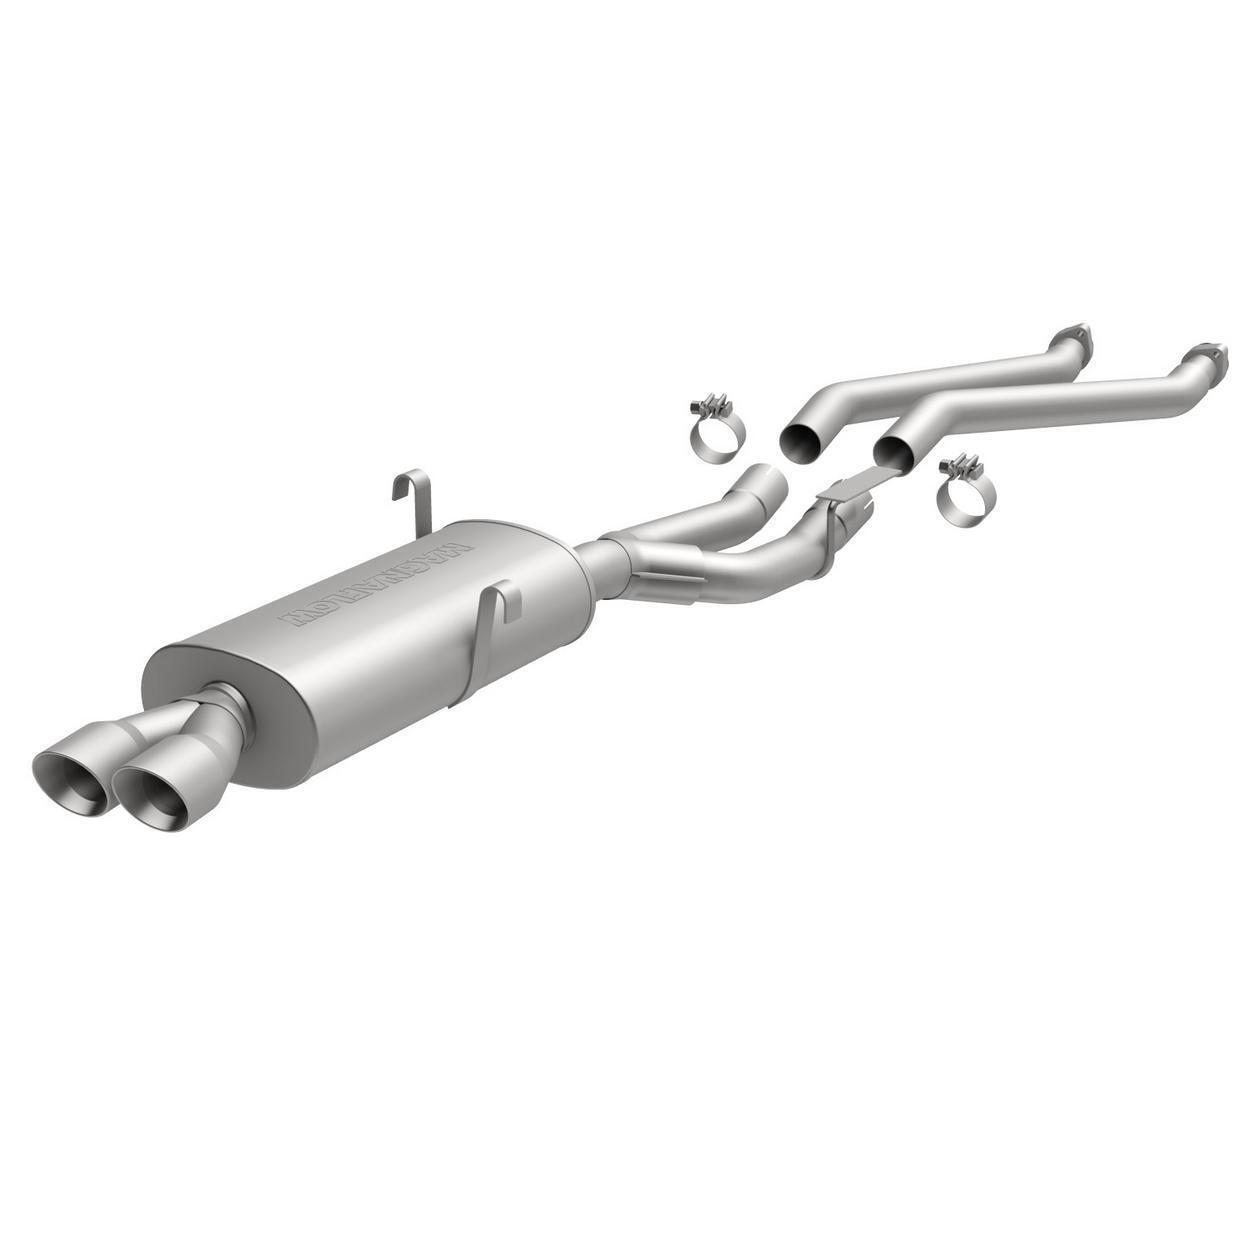 Magnaflow Exhaust System Kit for 1991 BMW 325is